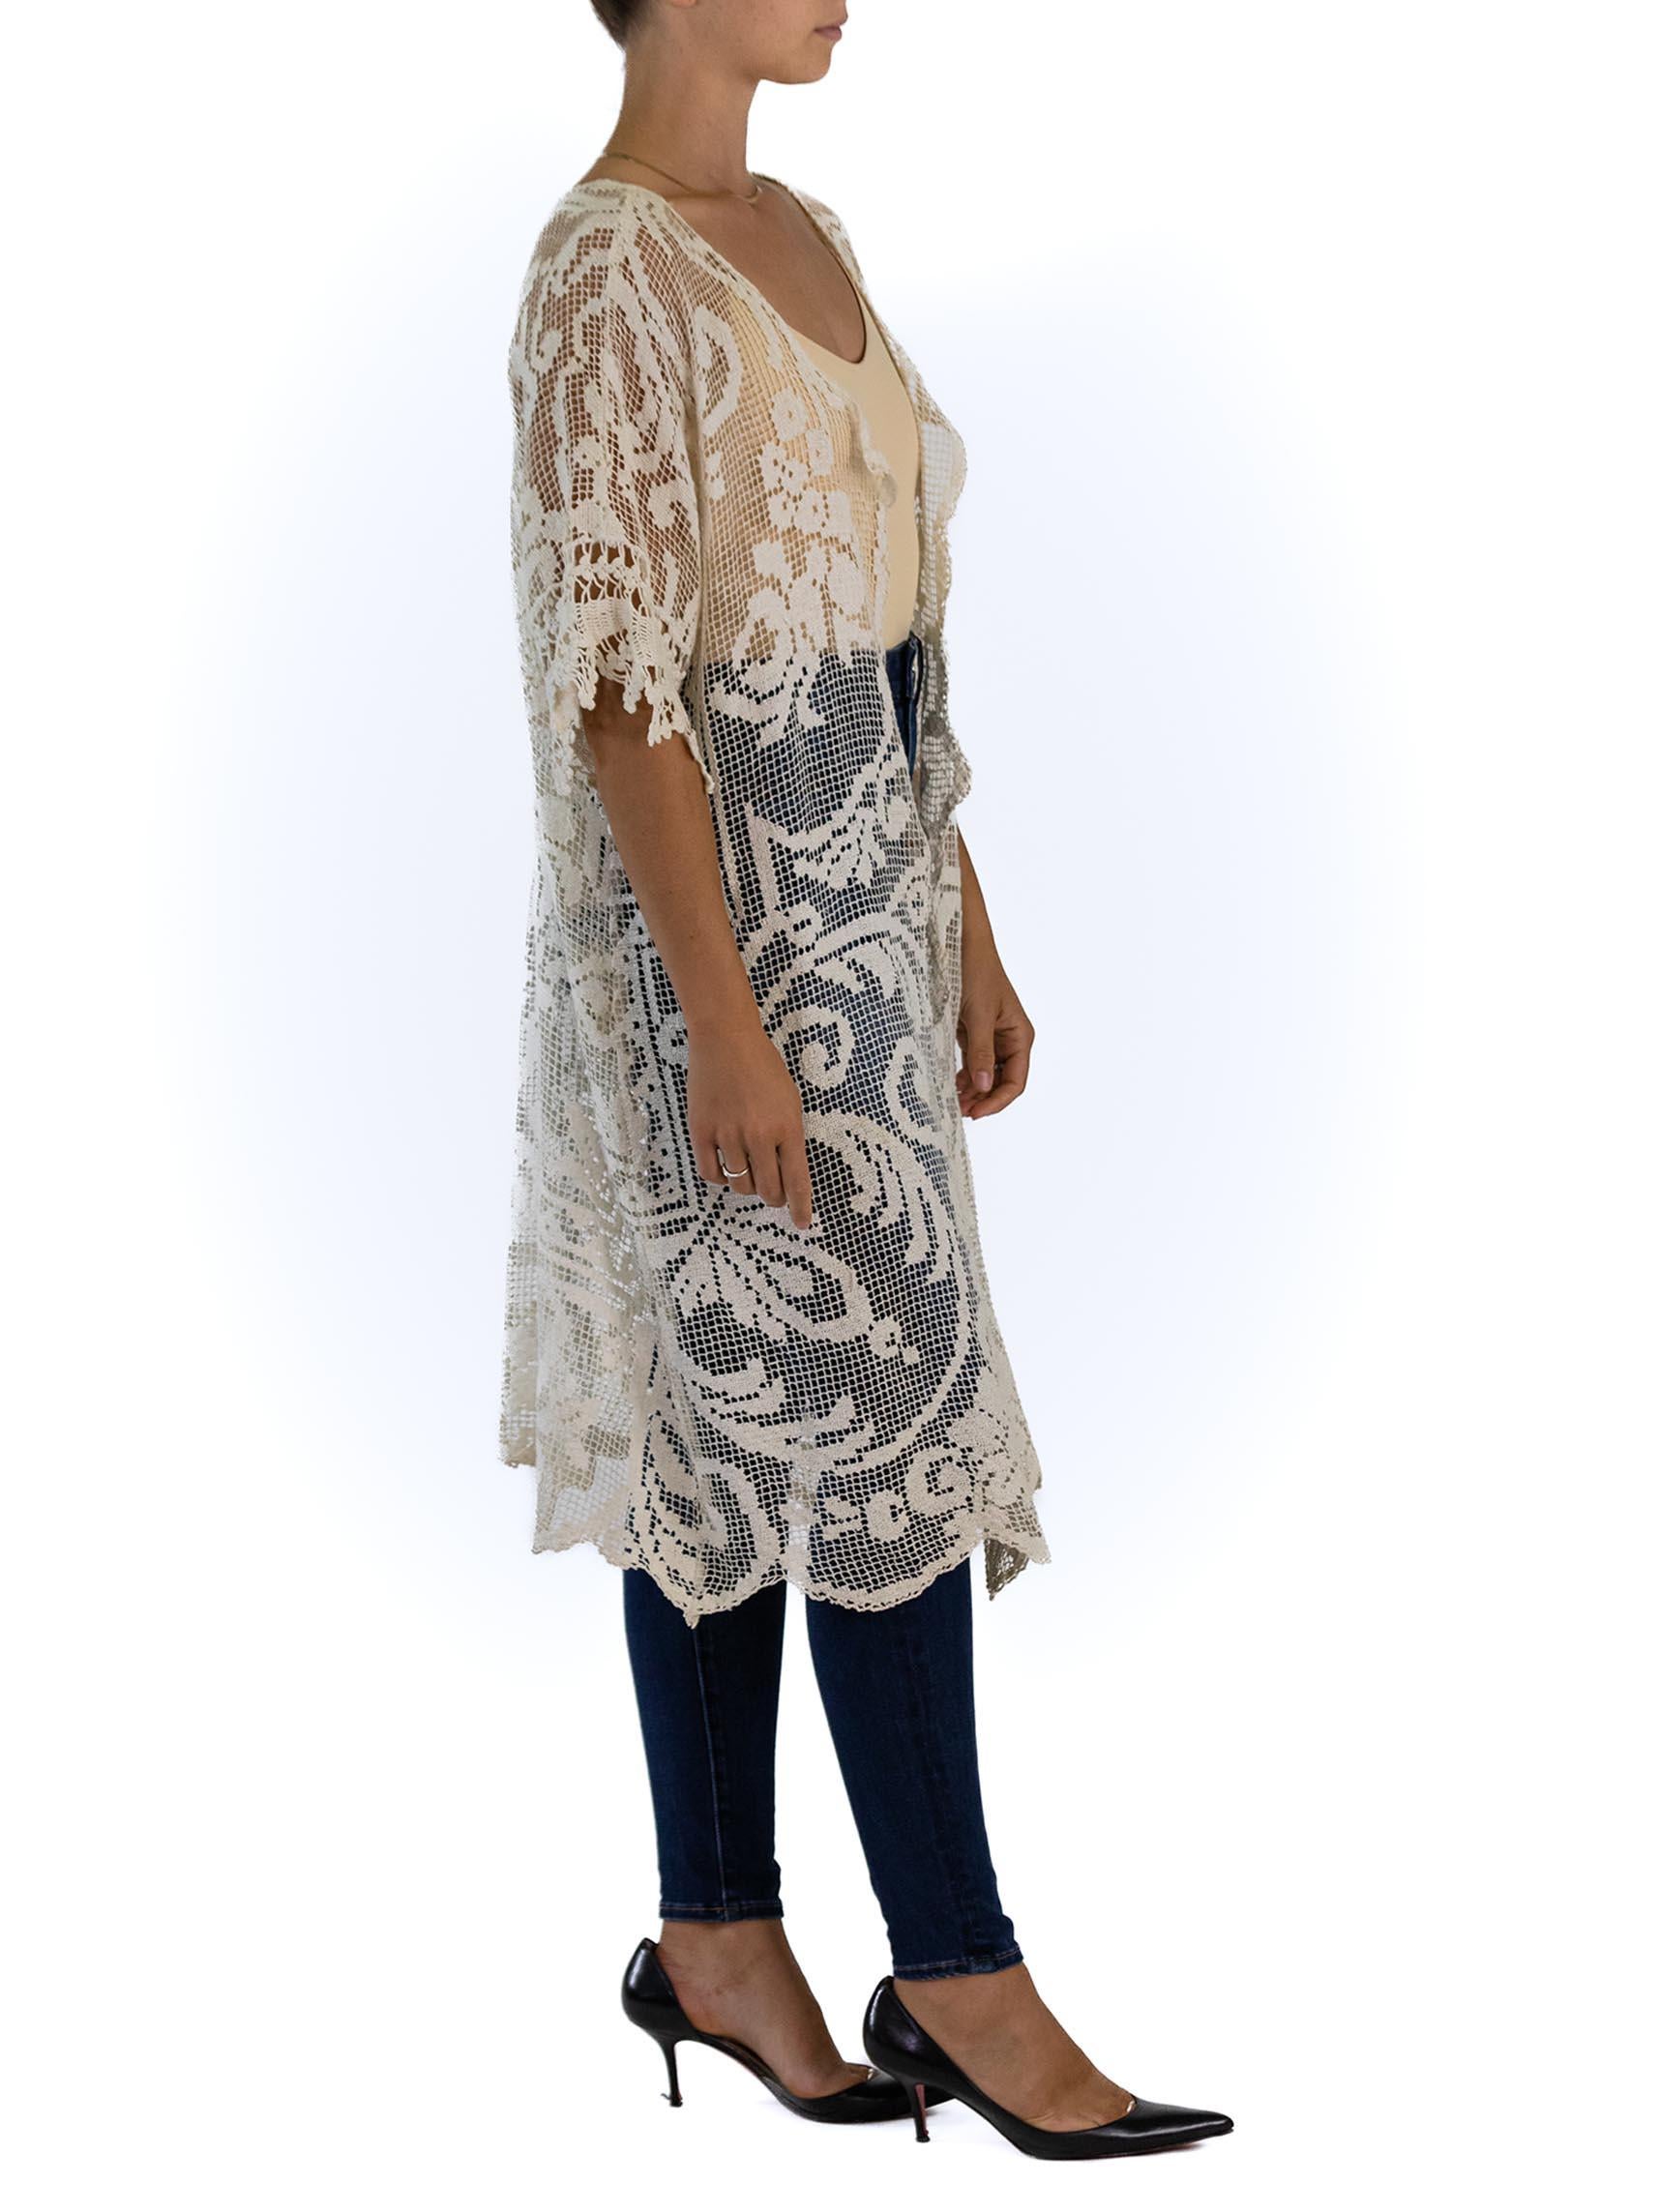 Women's 1920S Cream Cotton Hand Made Filet Lace Duster